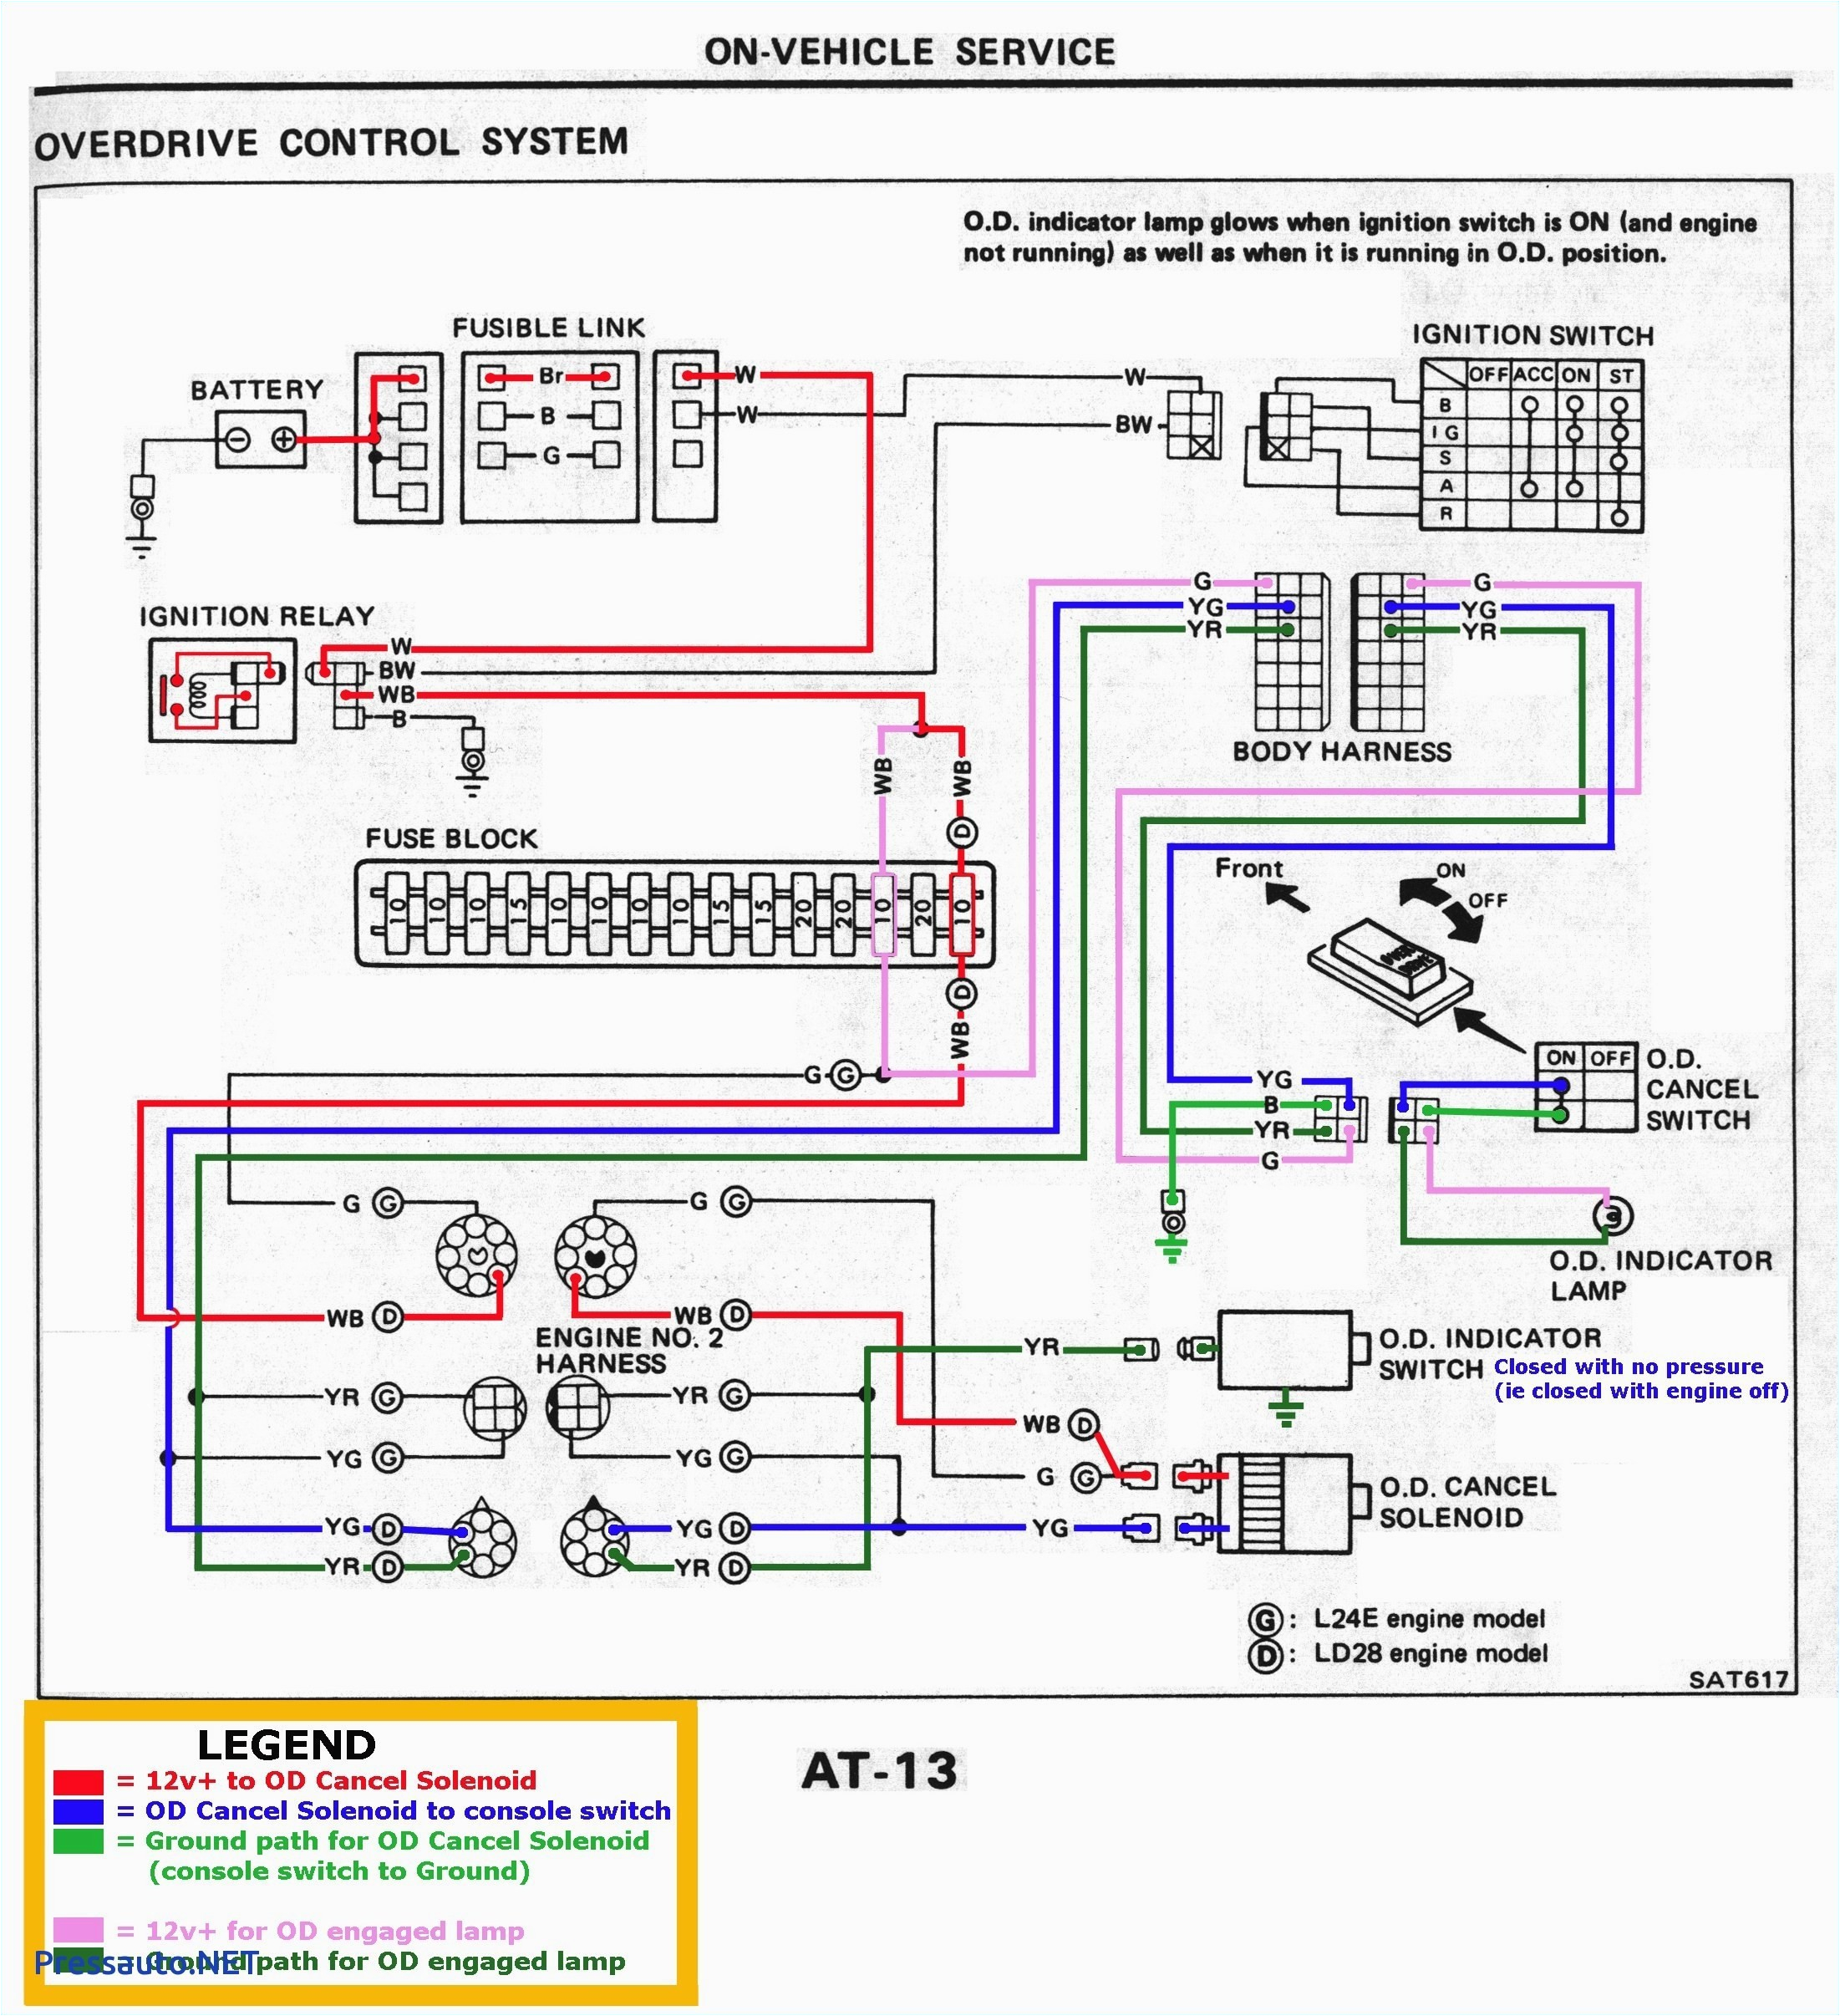 wiring diagram for kes wiring diagram page wiring diagram for kes